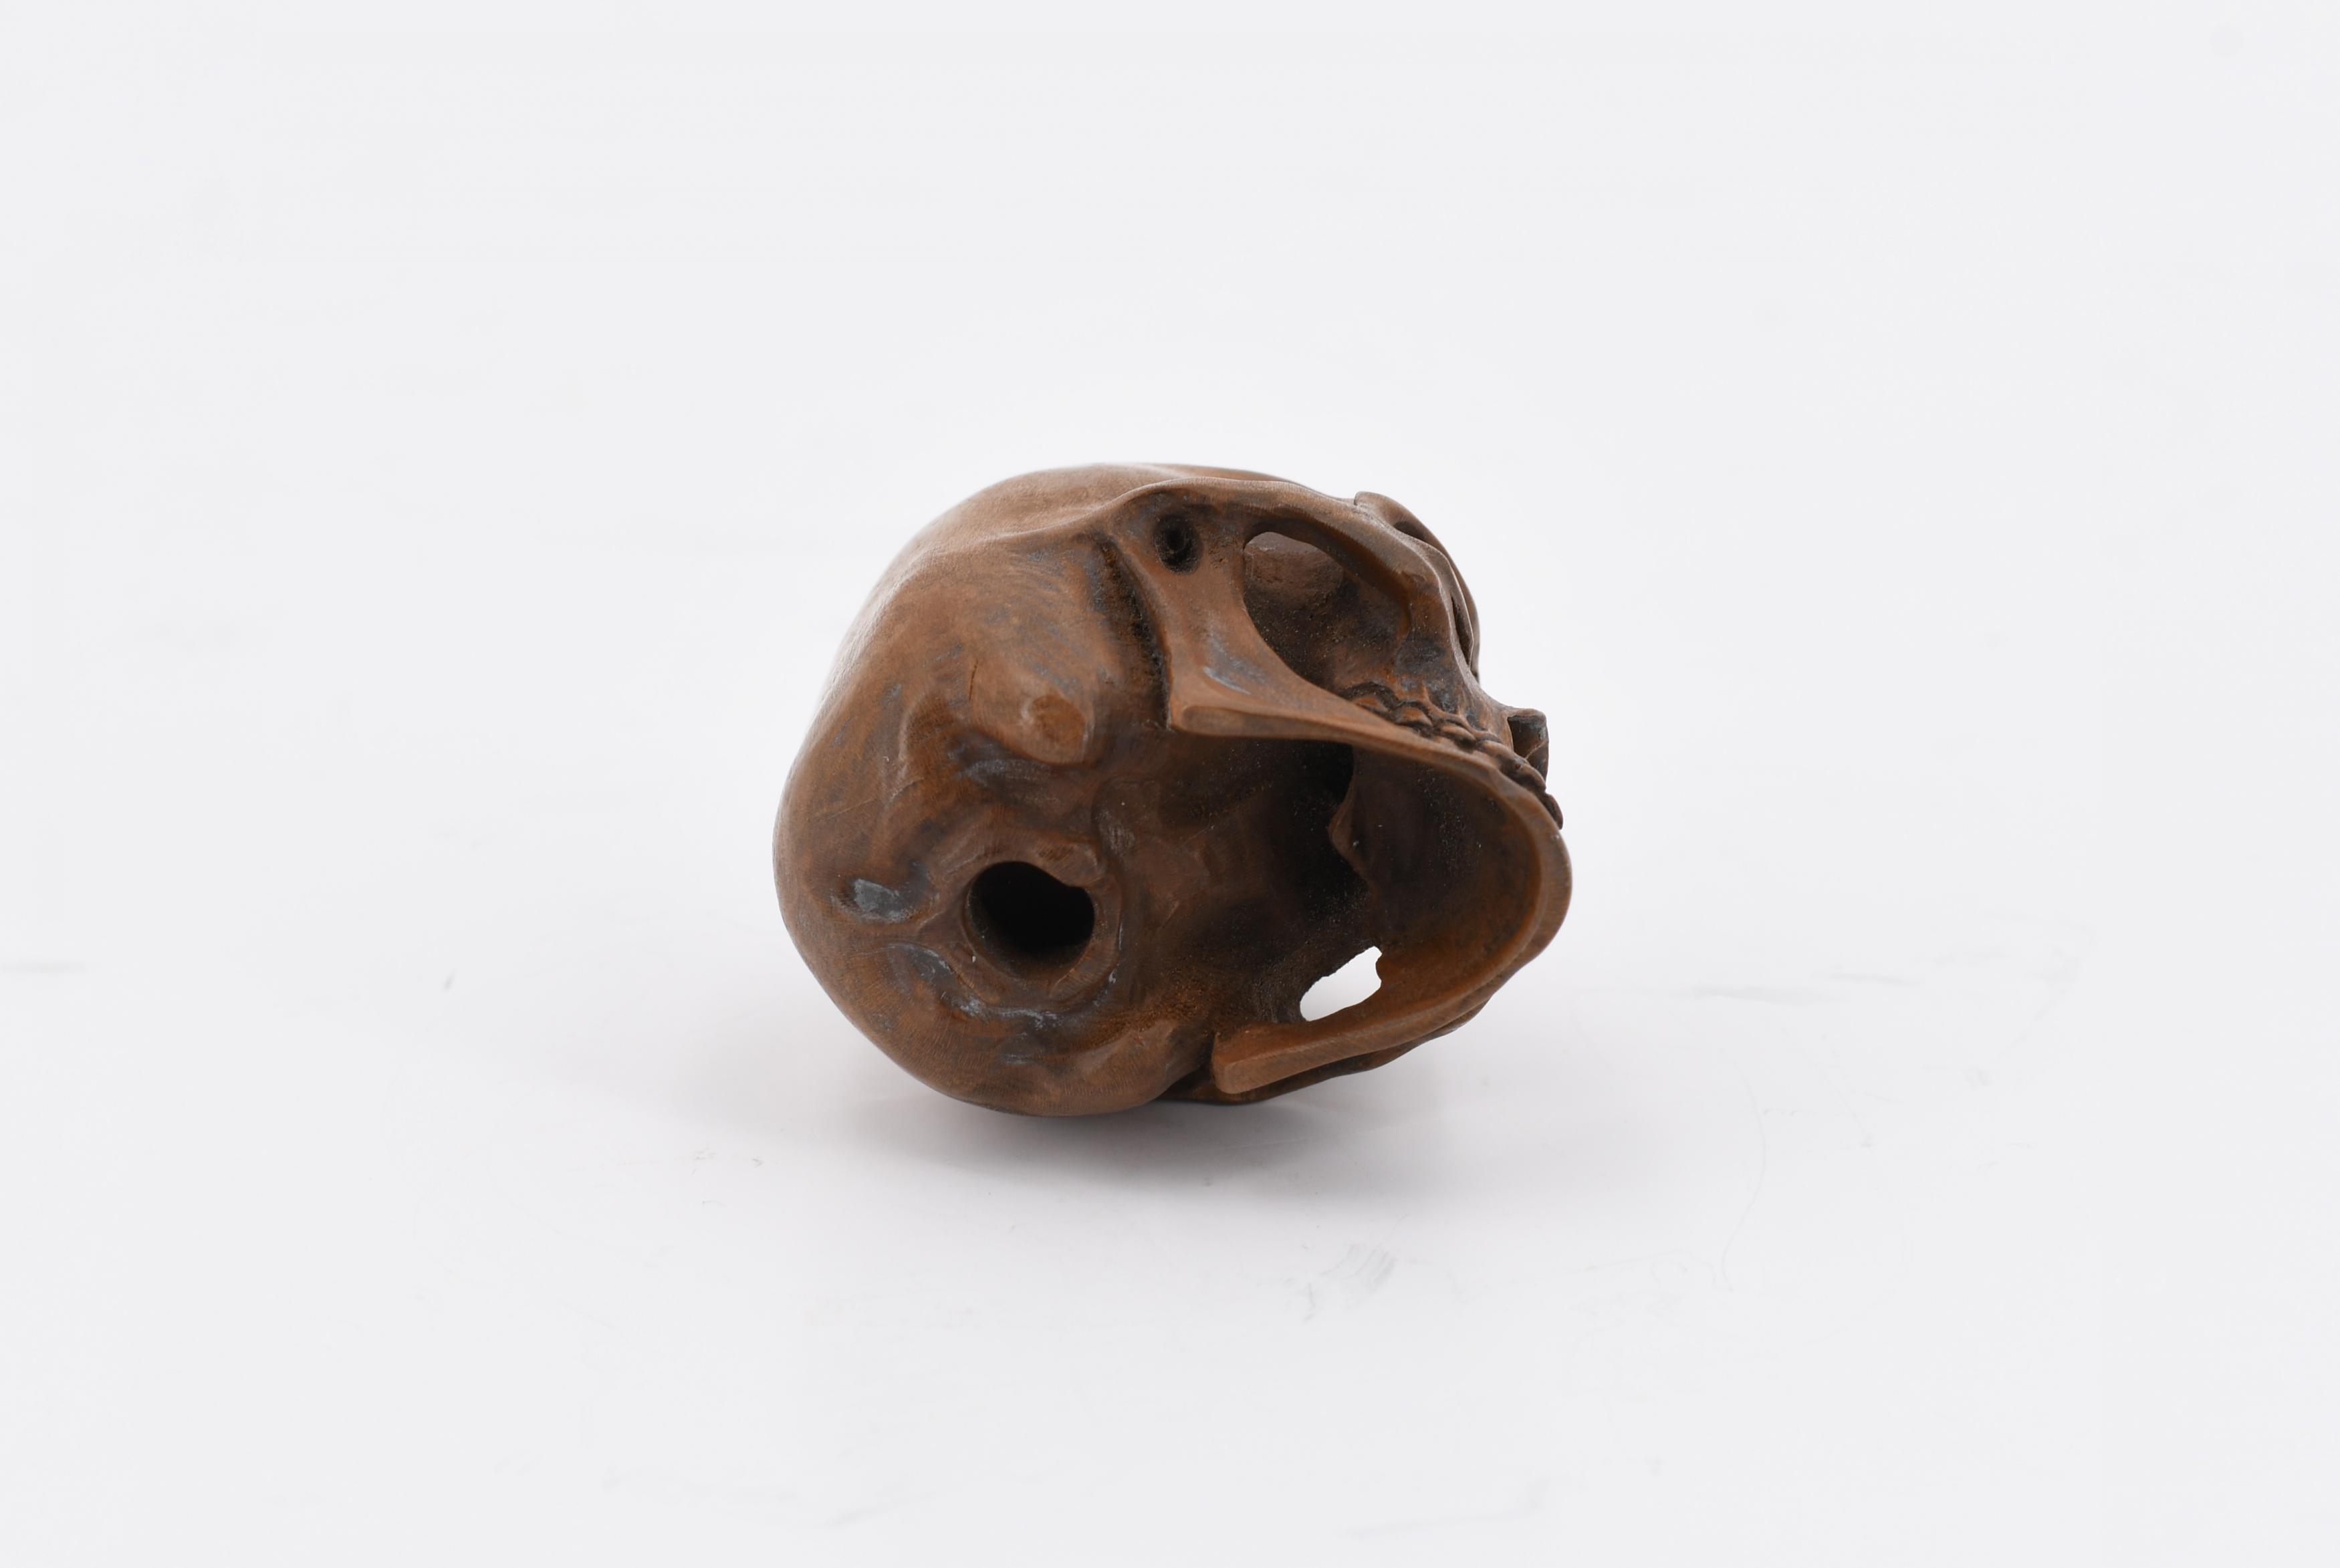 Small wooden skull - Image 6 of 6